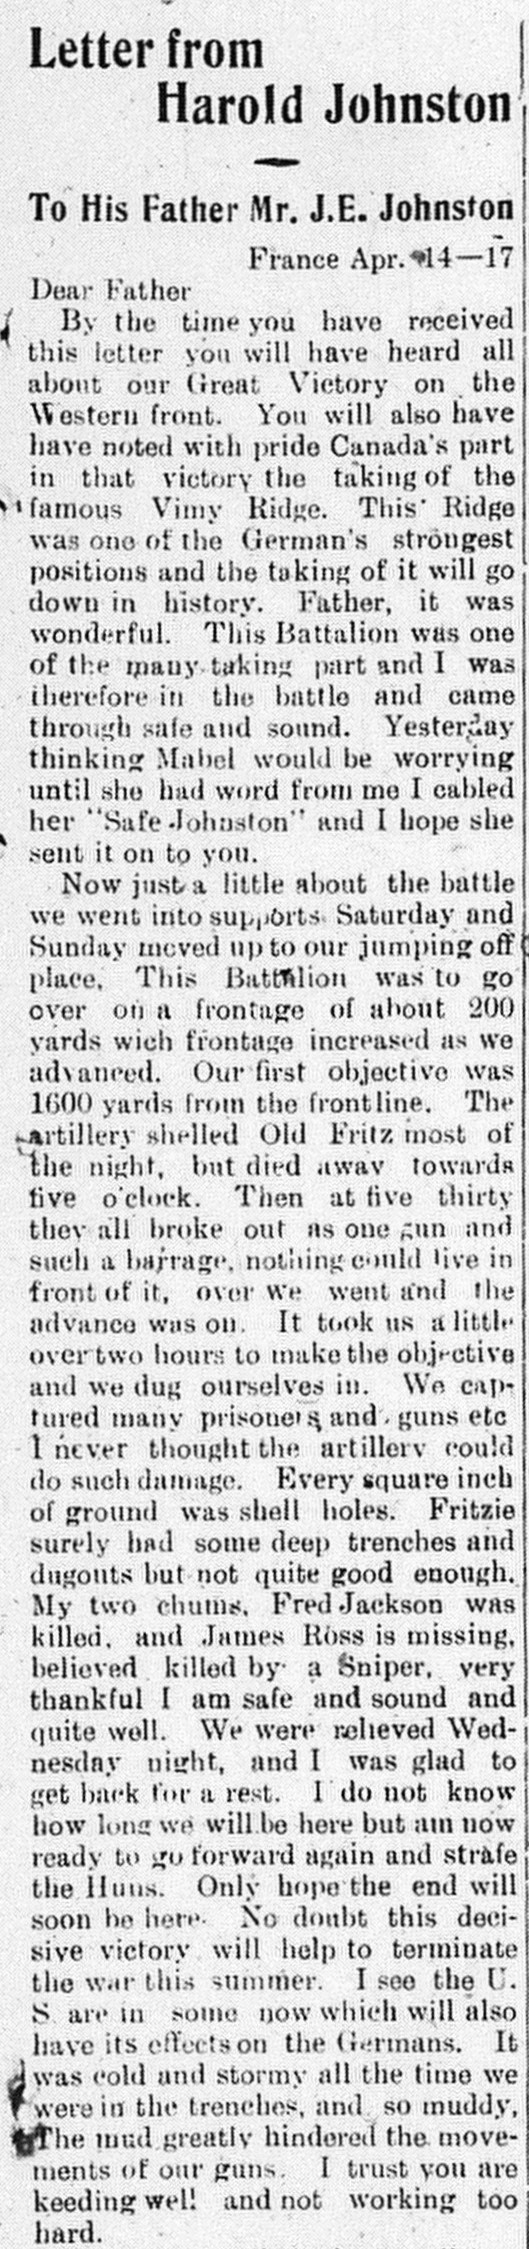 The Canadian Echo, May 30, 1917 Article, part 1